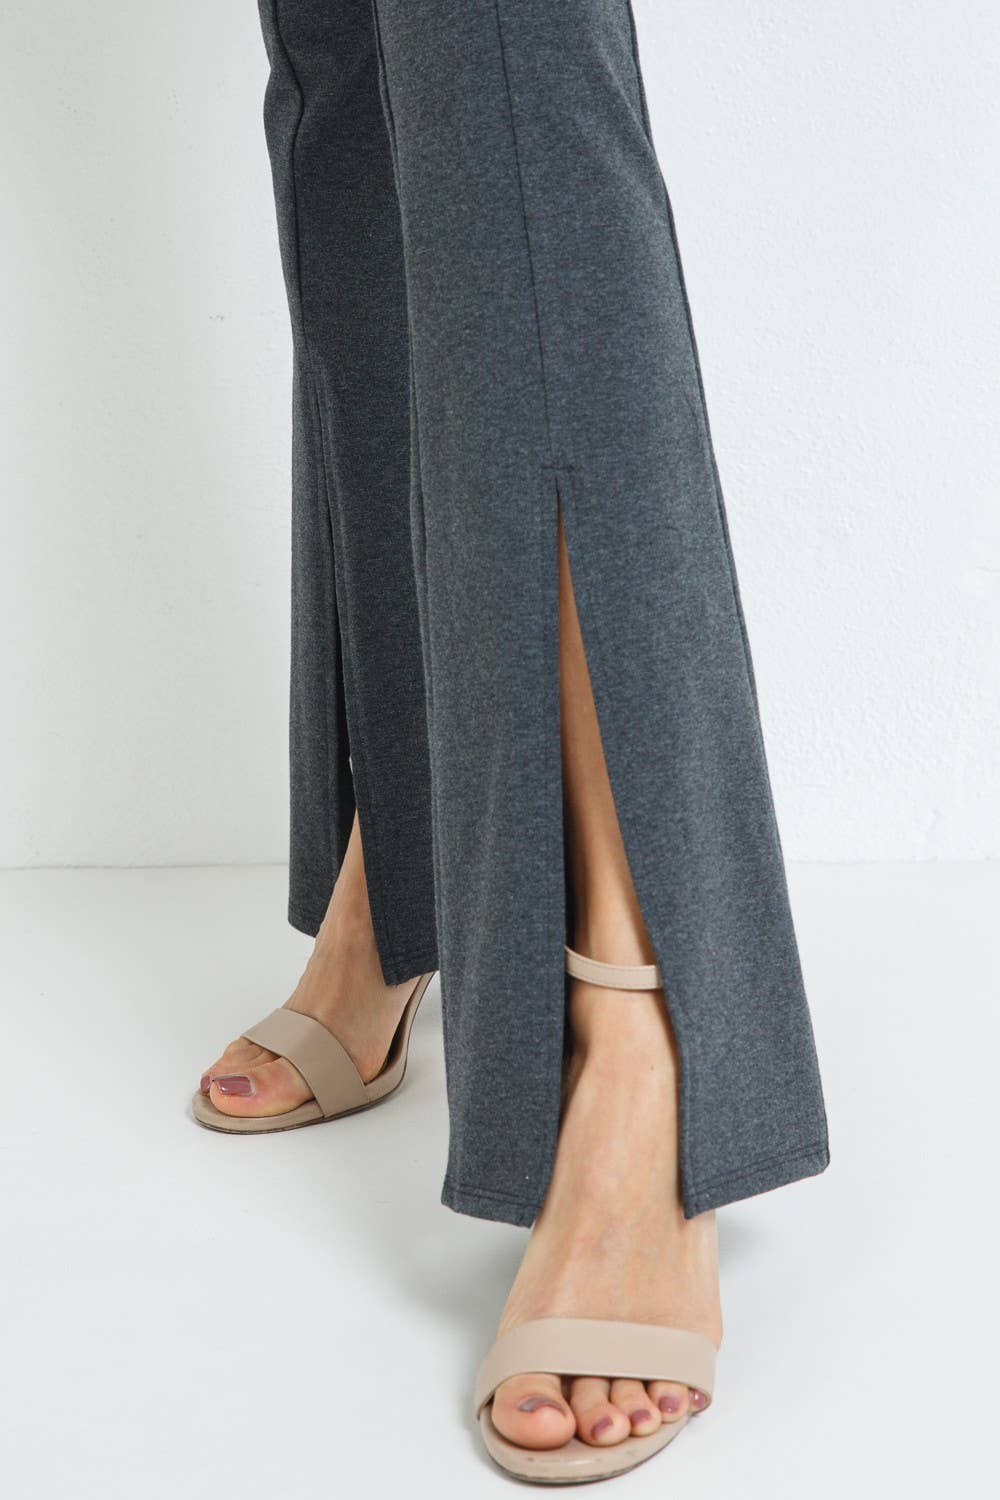 Women's Front Slit Flare Pants in BLACK OR CHARCOAL GRAY